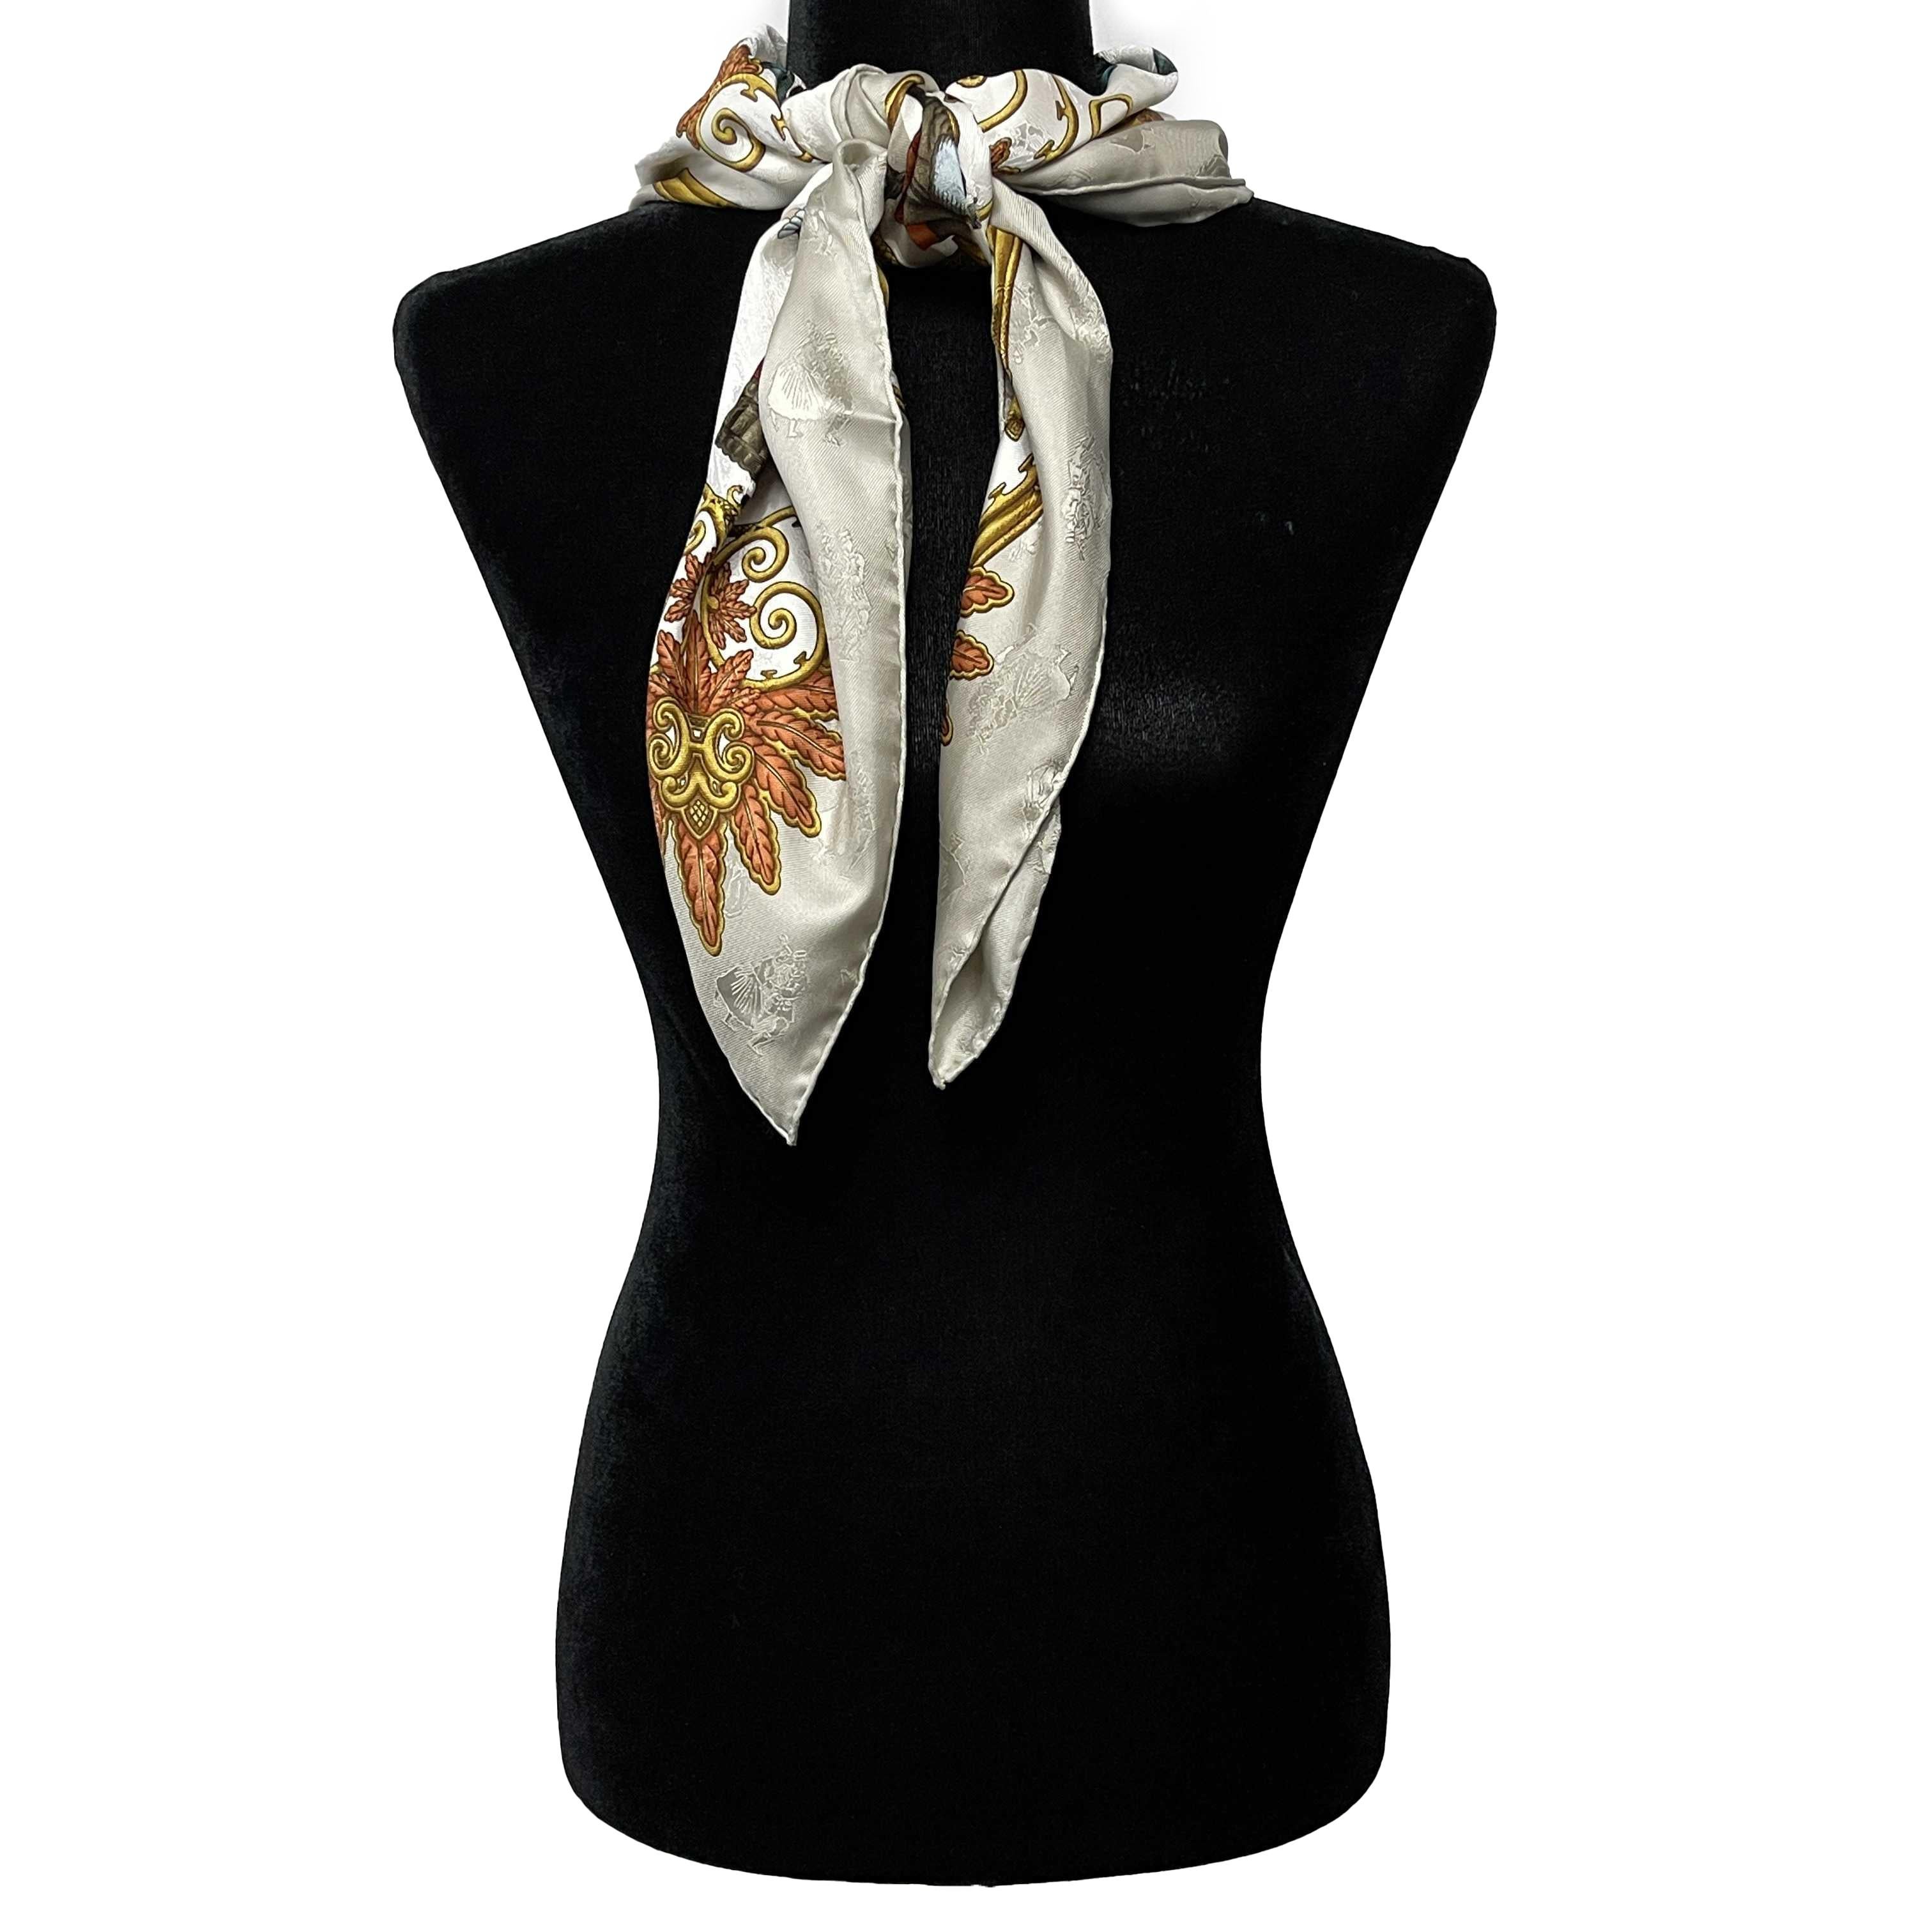 Hermès - Pristine - Vintage 1990s Joies d'Hiver - 'Winter Joys' - Jacquard Silk - Grey, White, Gold, Orange, Brown, Burgundy, Blue - Scarf

Description

This Hèrmes vintage scarf was designed by Joachim Metz and was released in 1992.
It is crafted